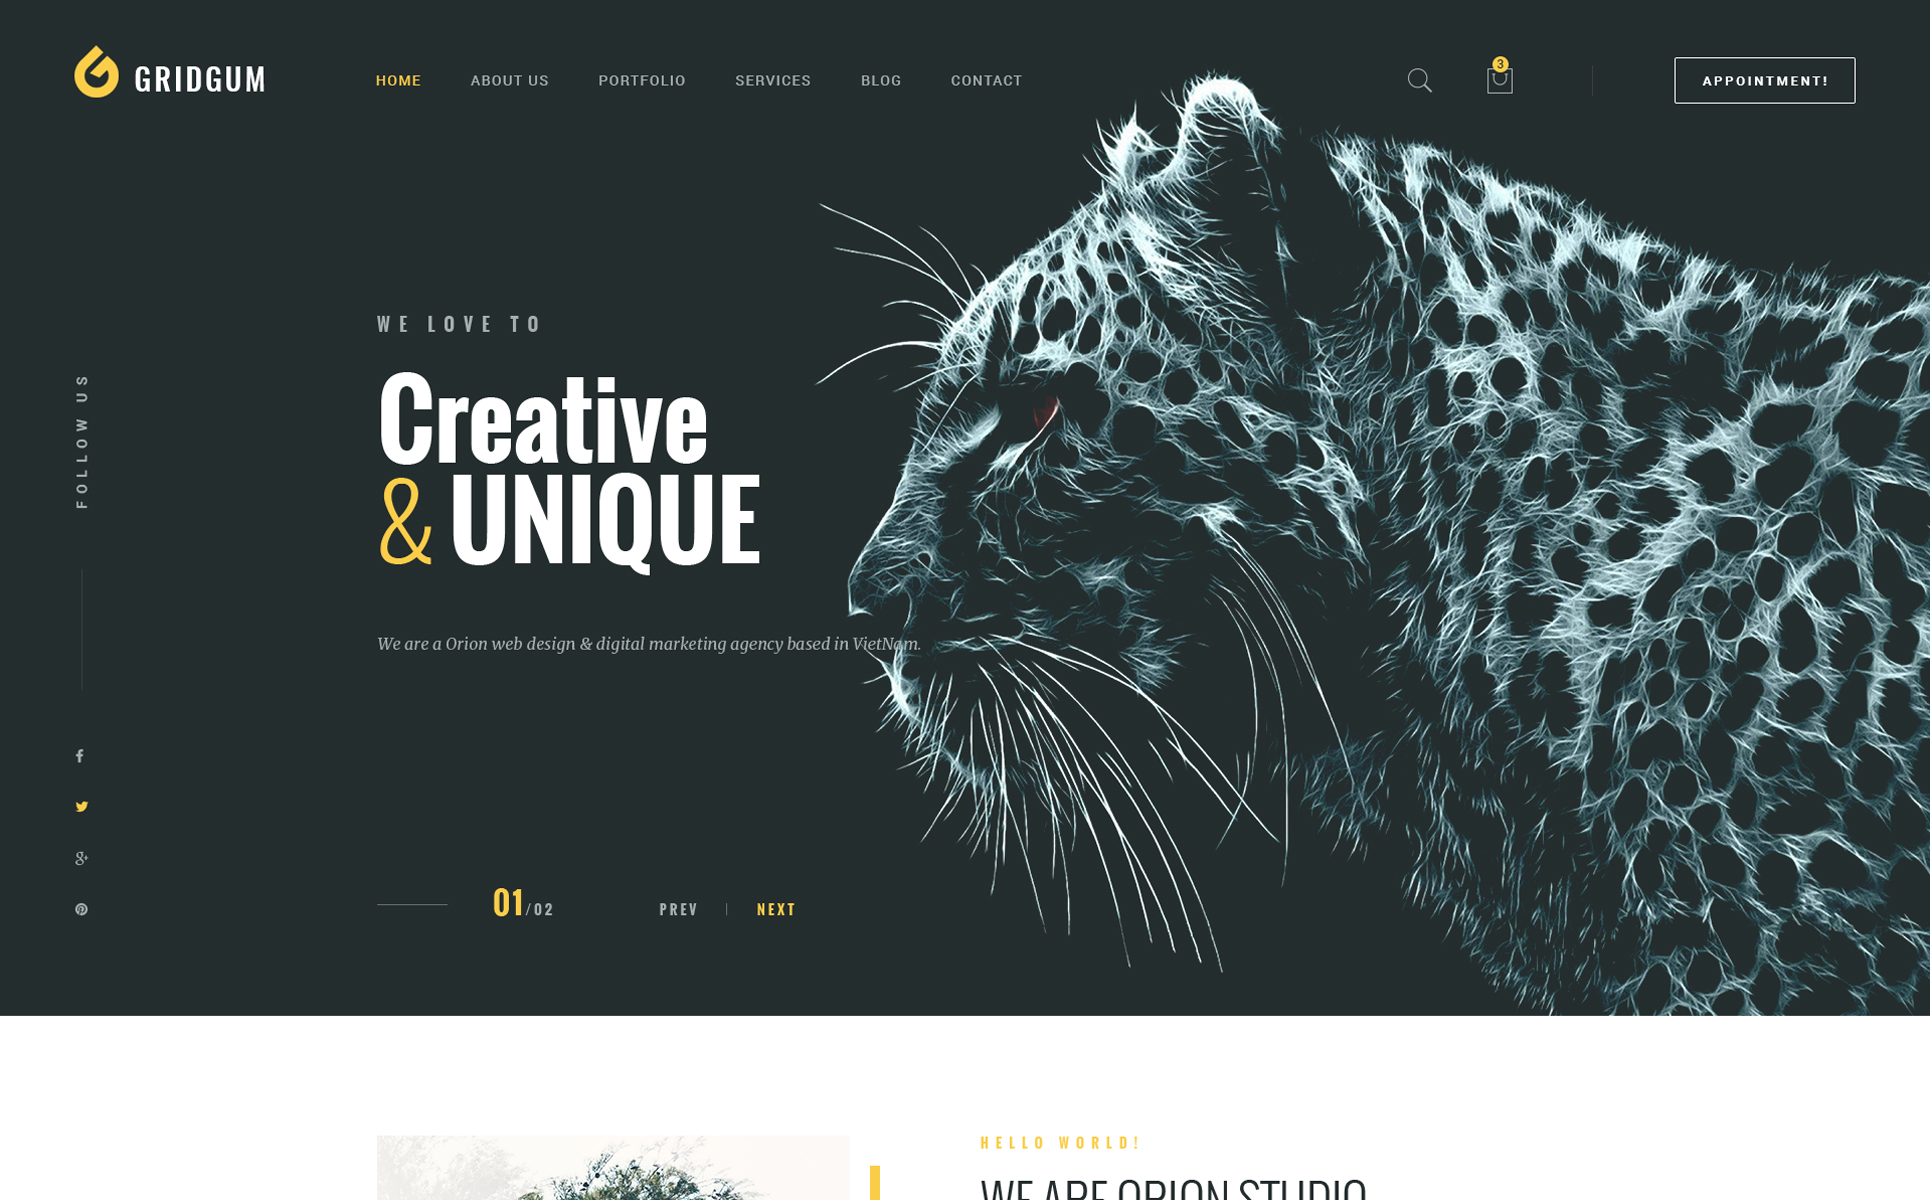 bootstrap studio templates free download